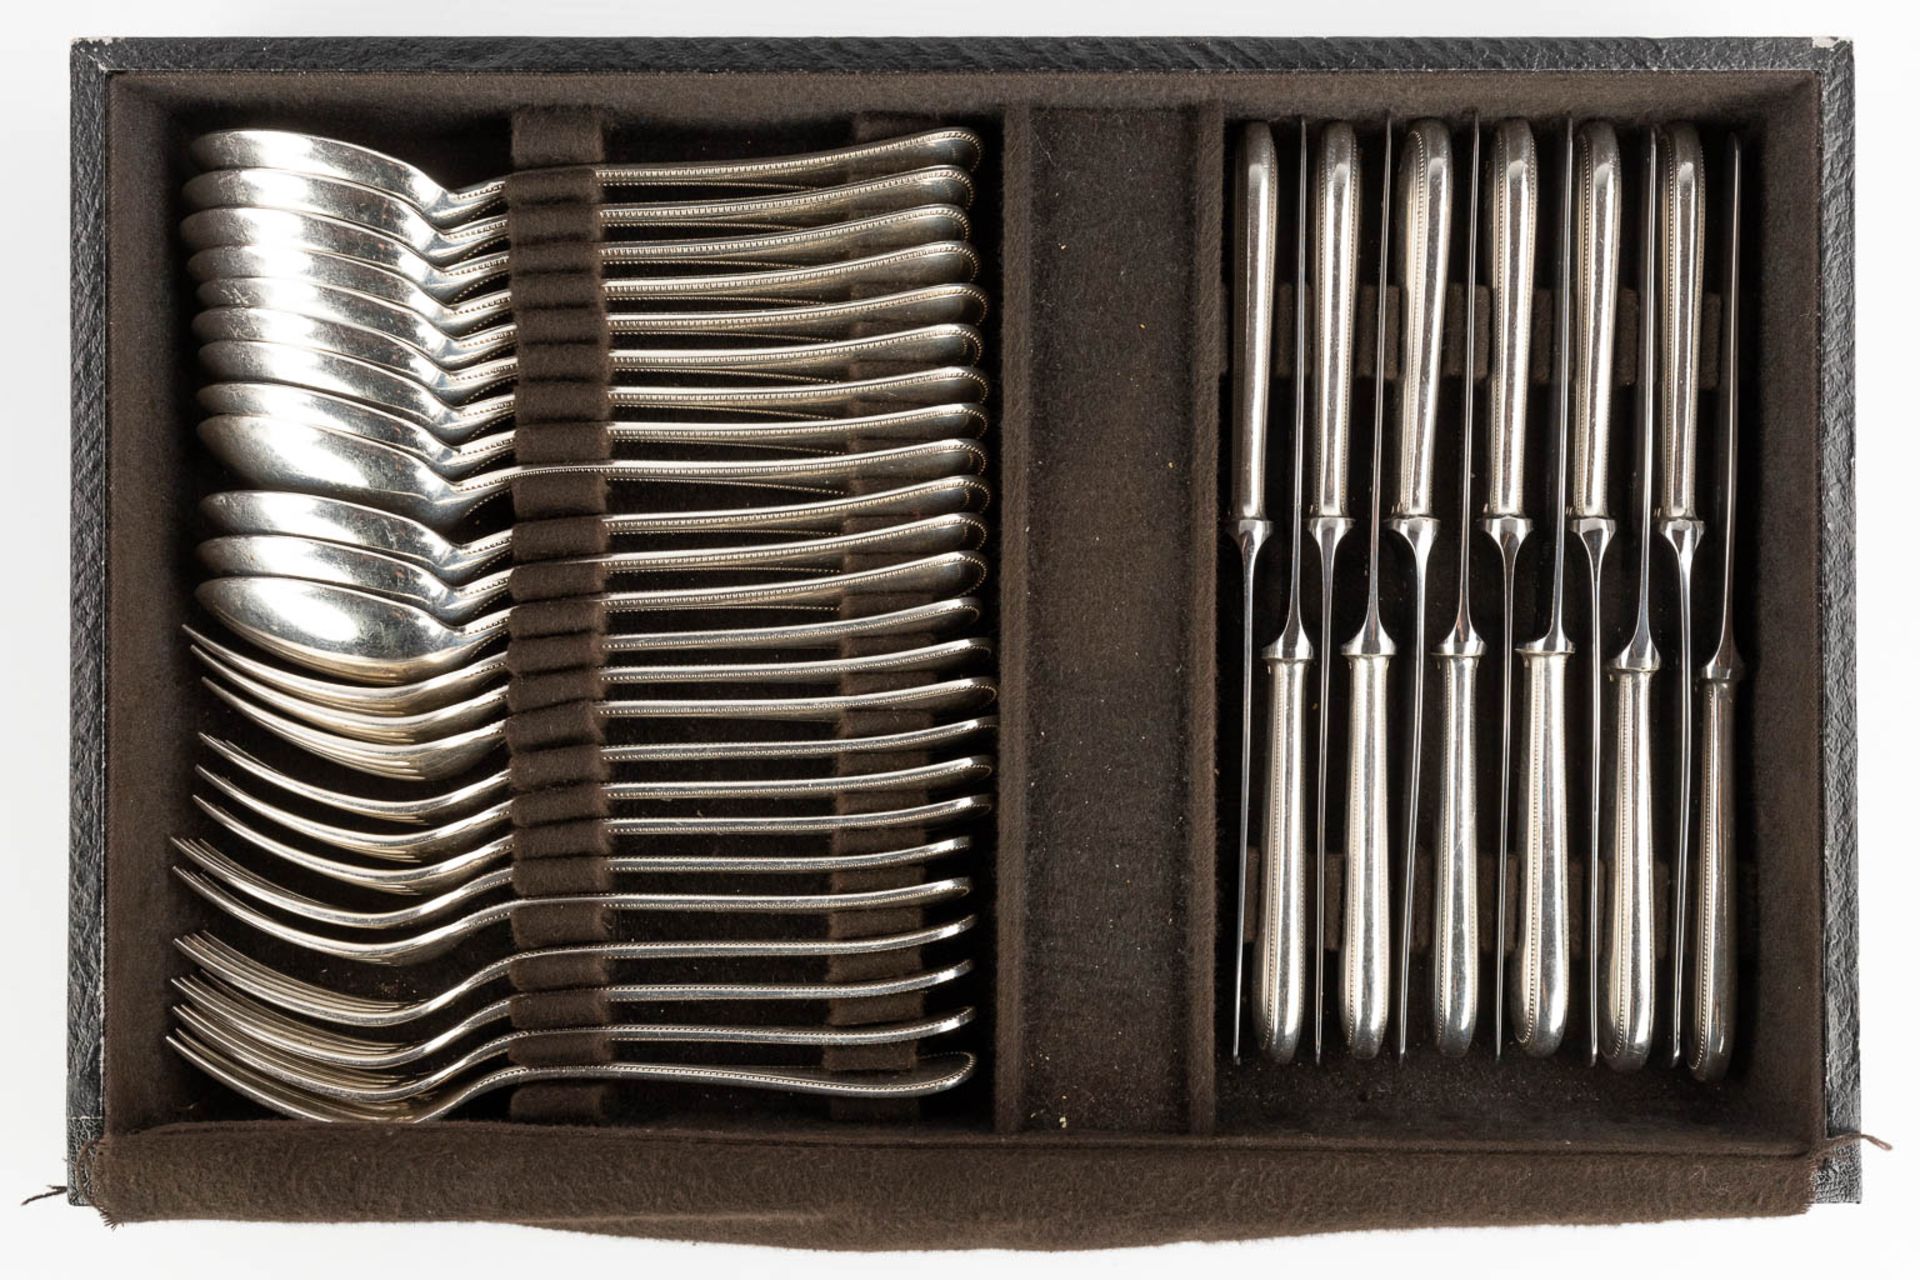 Christofle 'Perles' a large silver-plated cutlery in a storage box. 144 pieces. (D:29 x W:46 x H:33 - Image 17 of 21